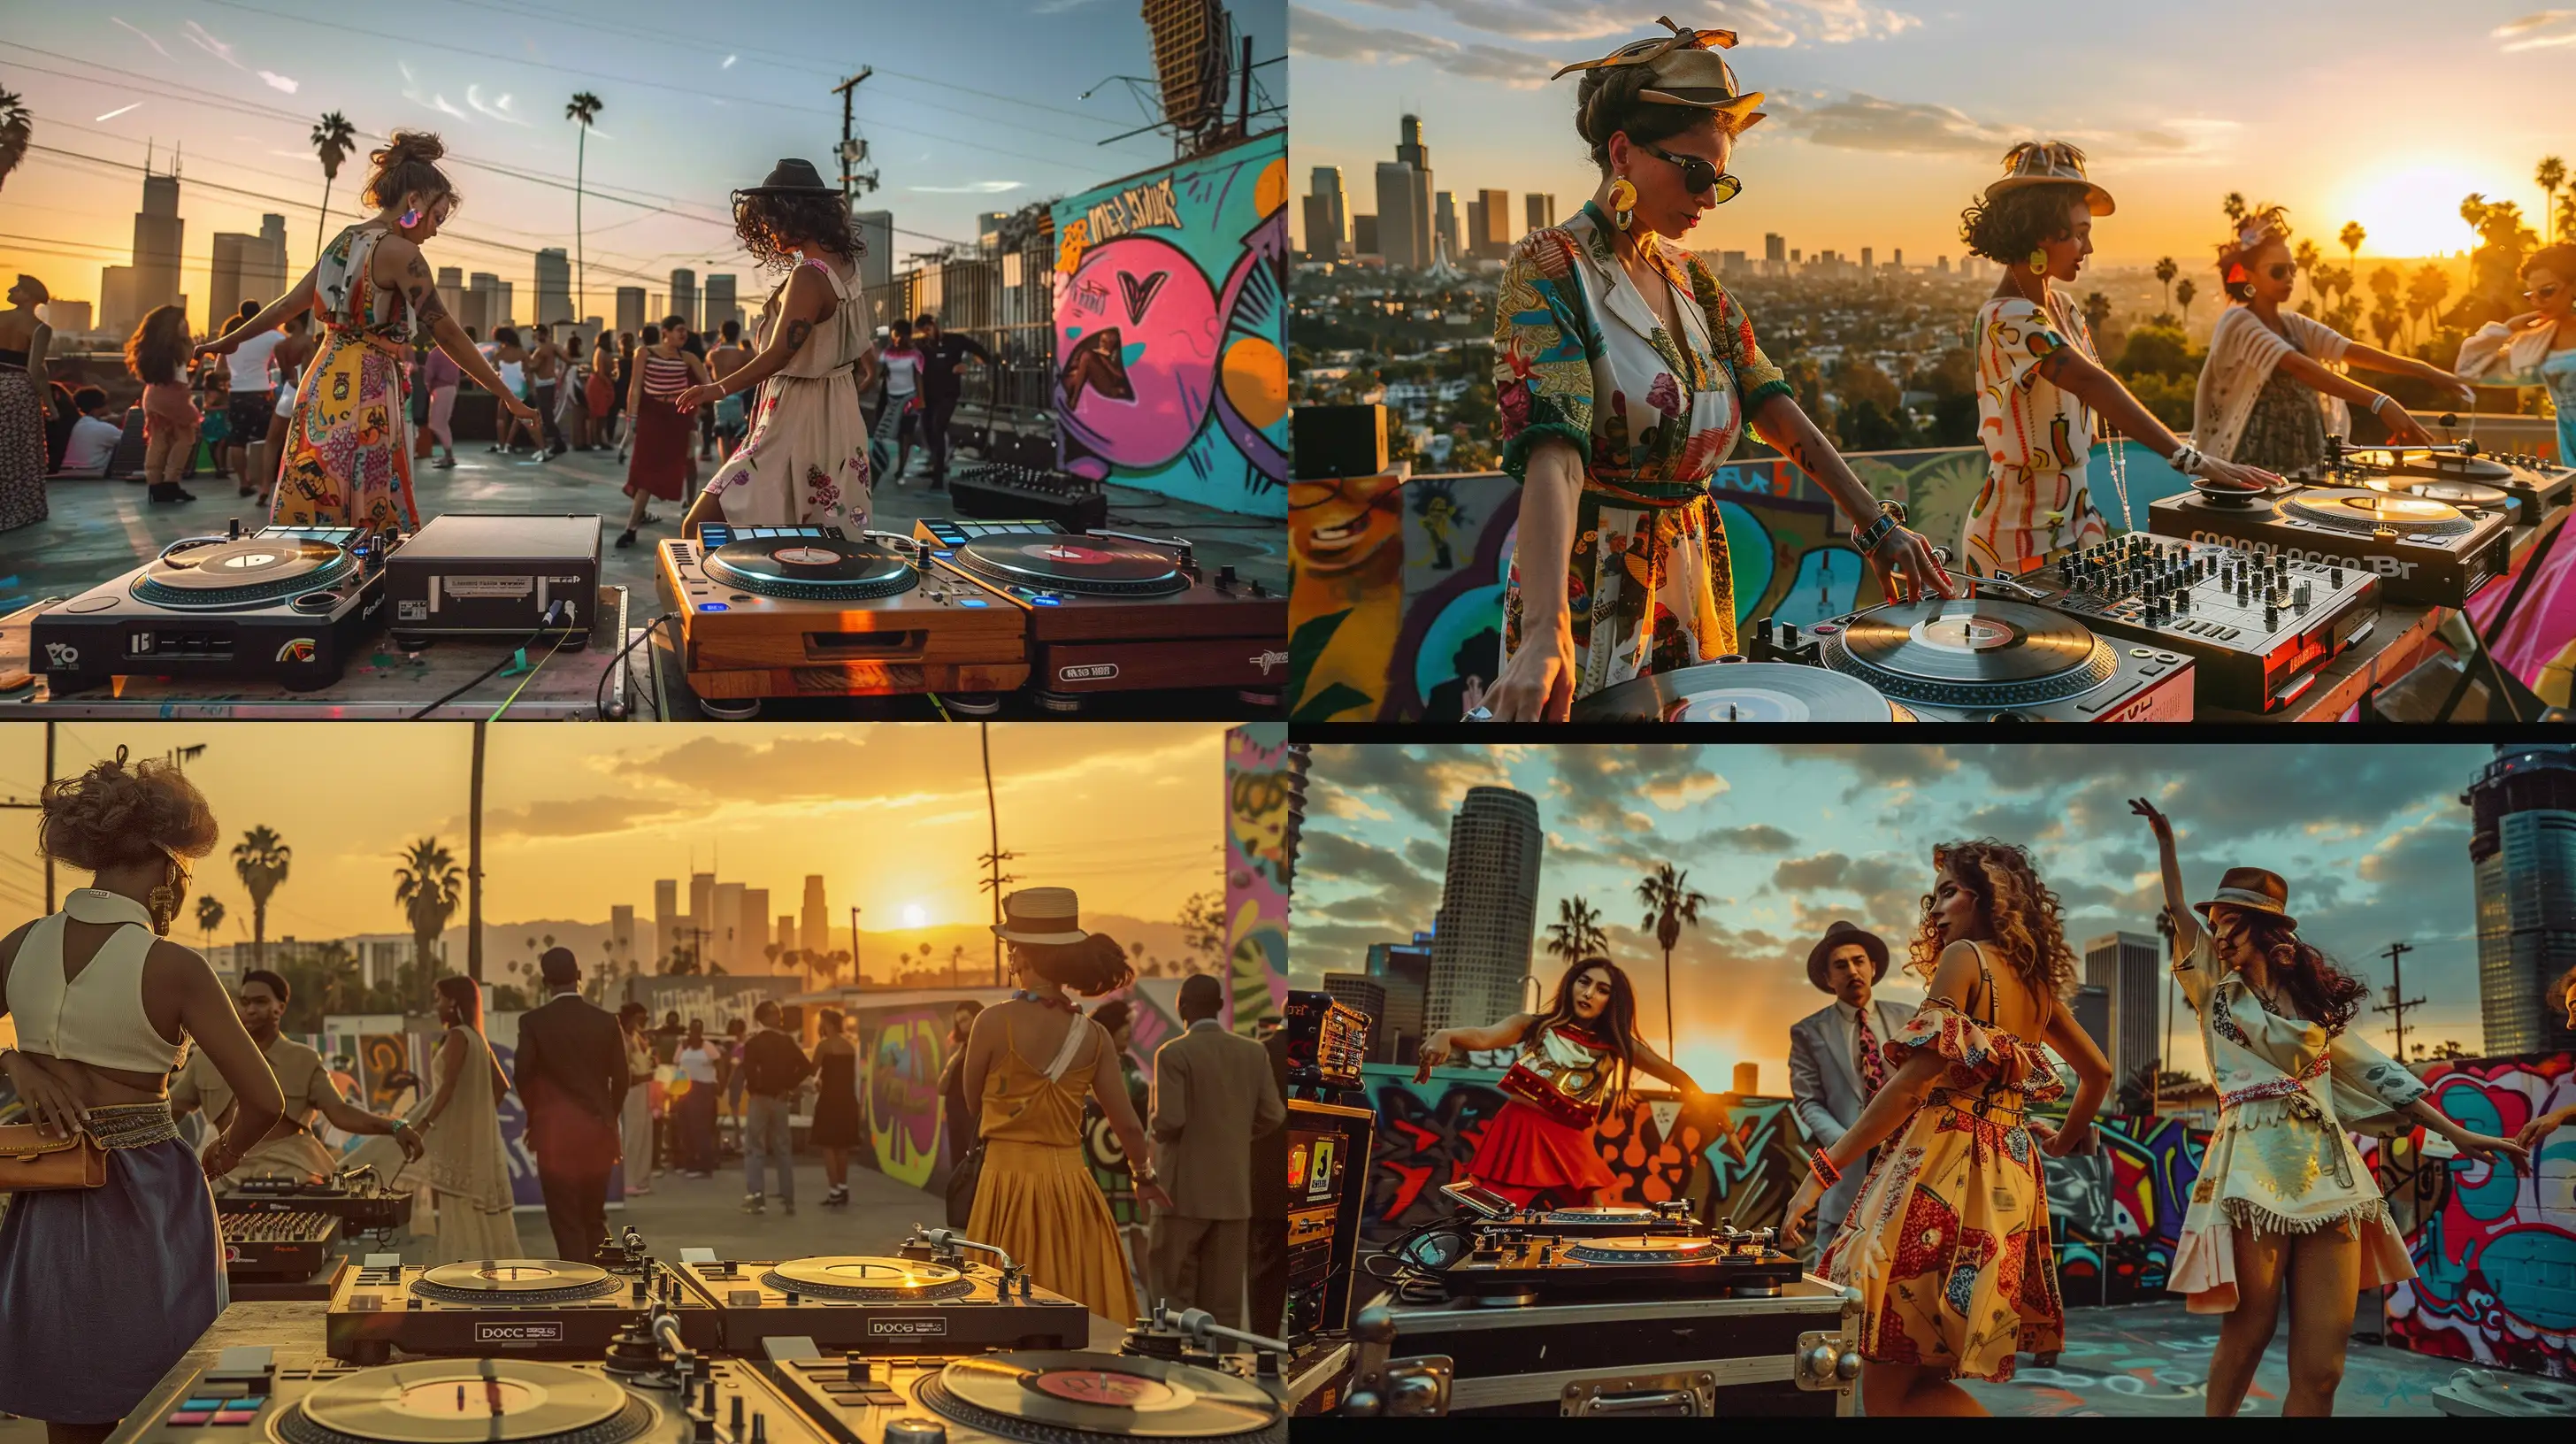 /imagine prompt: "Iconic 90s Chicago house club scene transported to Los Angeles, style elegant, minimal, sunset cityscape, dancers in vintage fashion, old-school turntables, vibrant street art backdrop" --ar 16:9 --v 6.0
